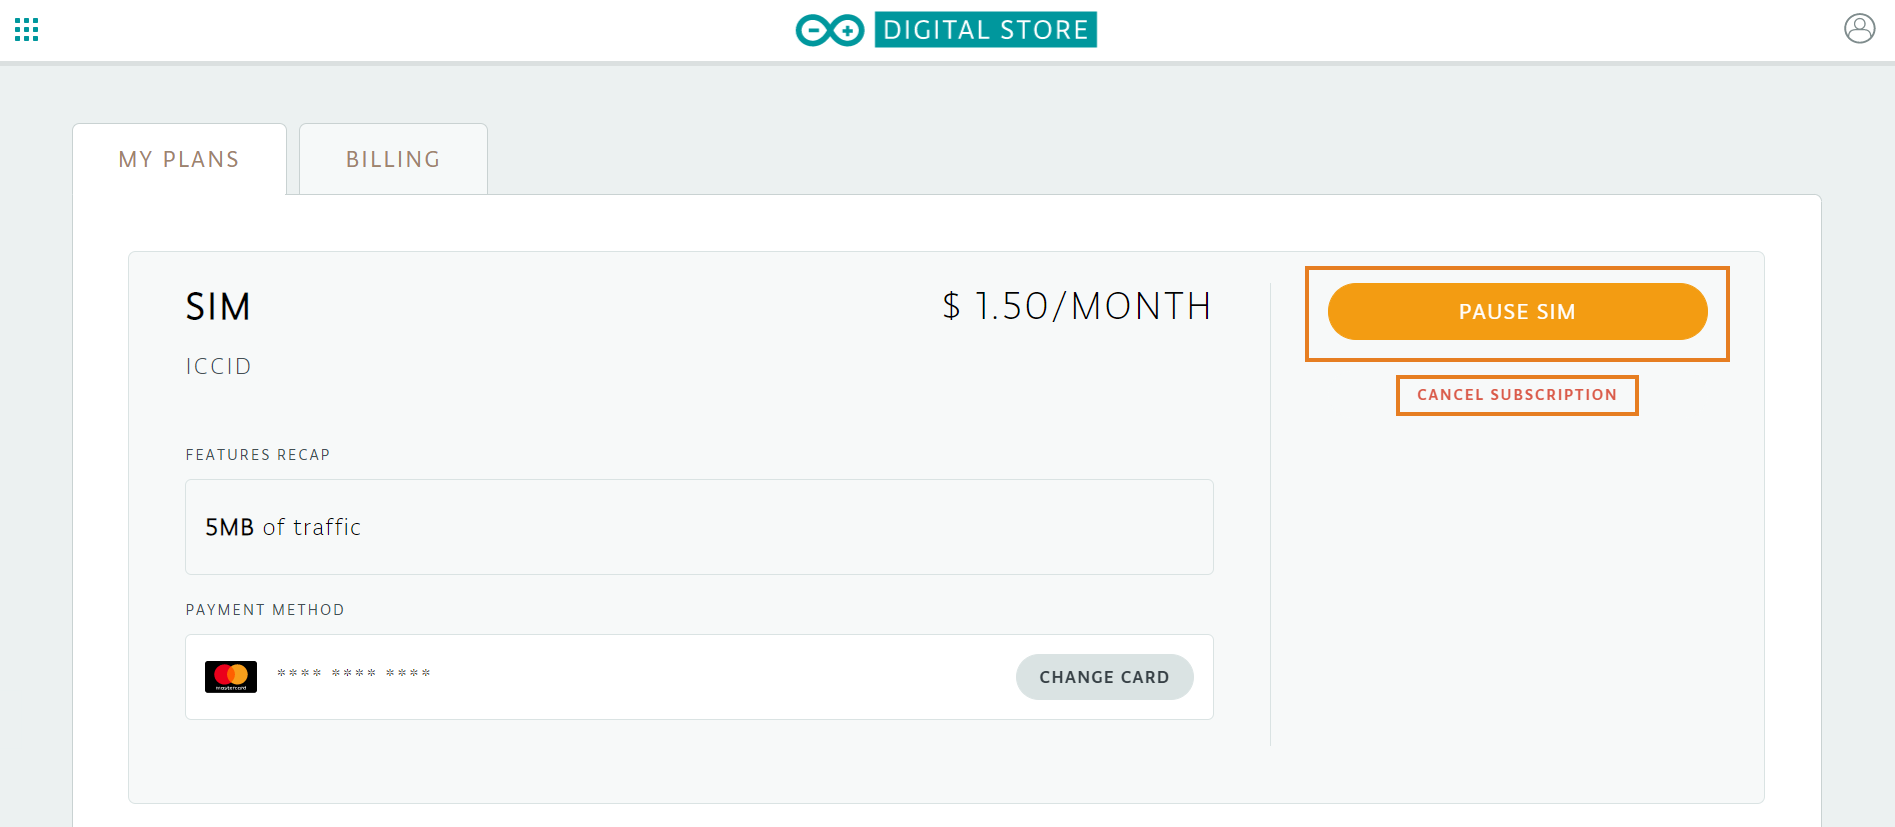 Arduino Digital Store with "Pause Sim" and "Cancel subscription" buttons highlighted